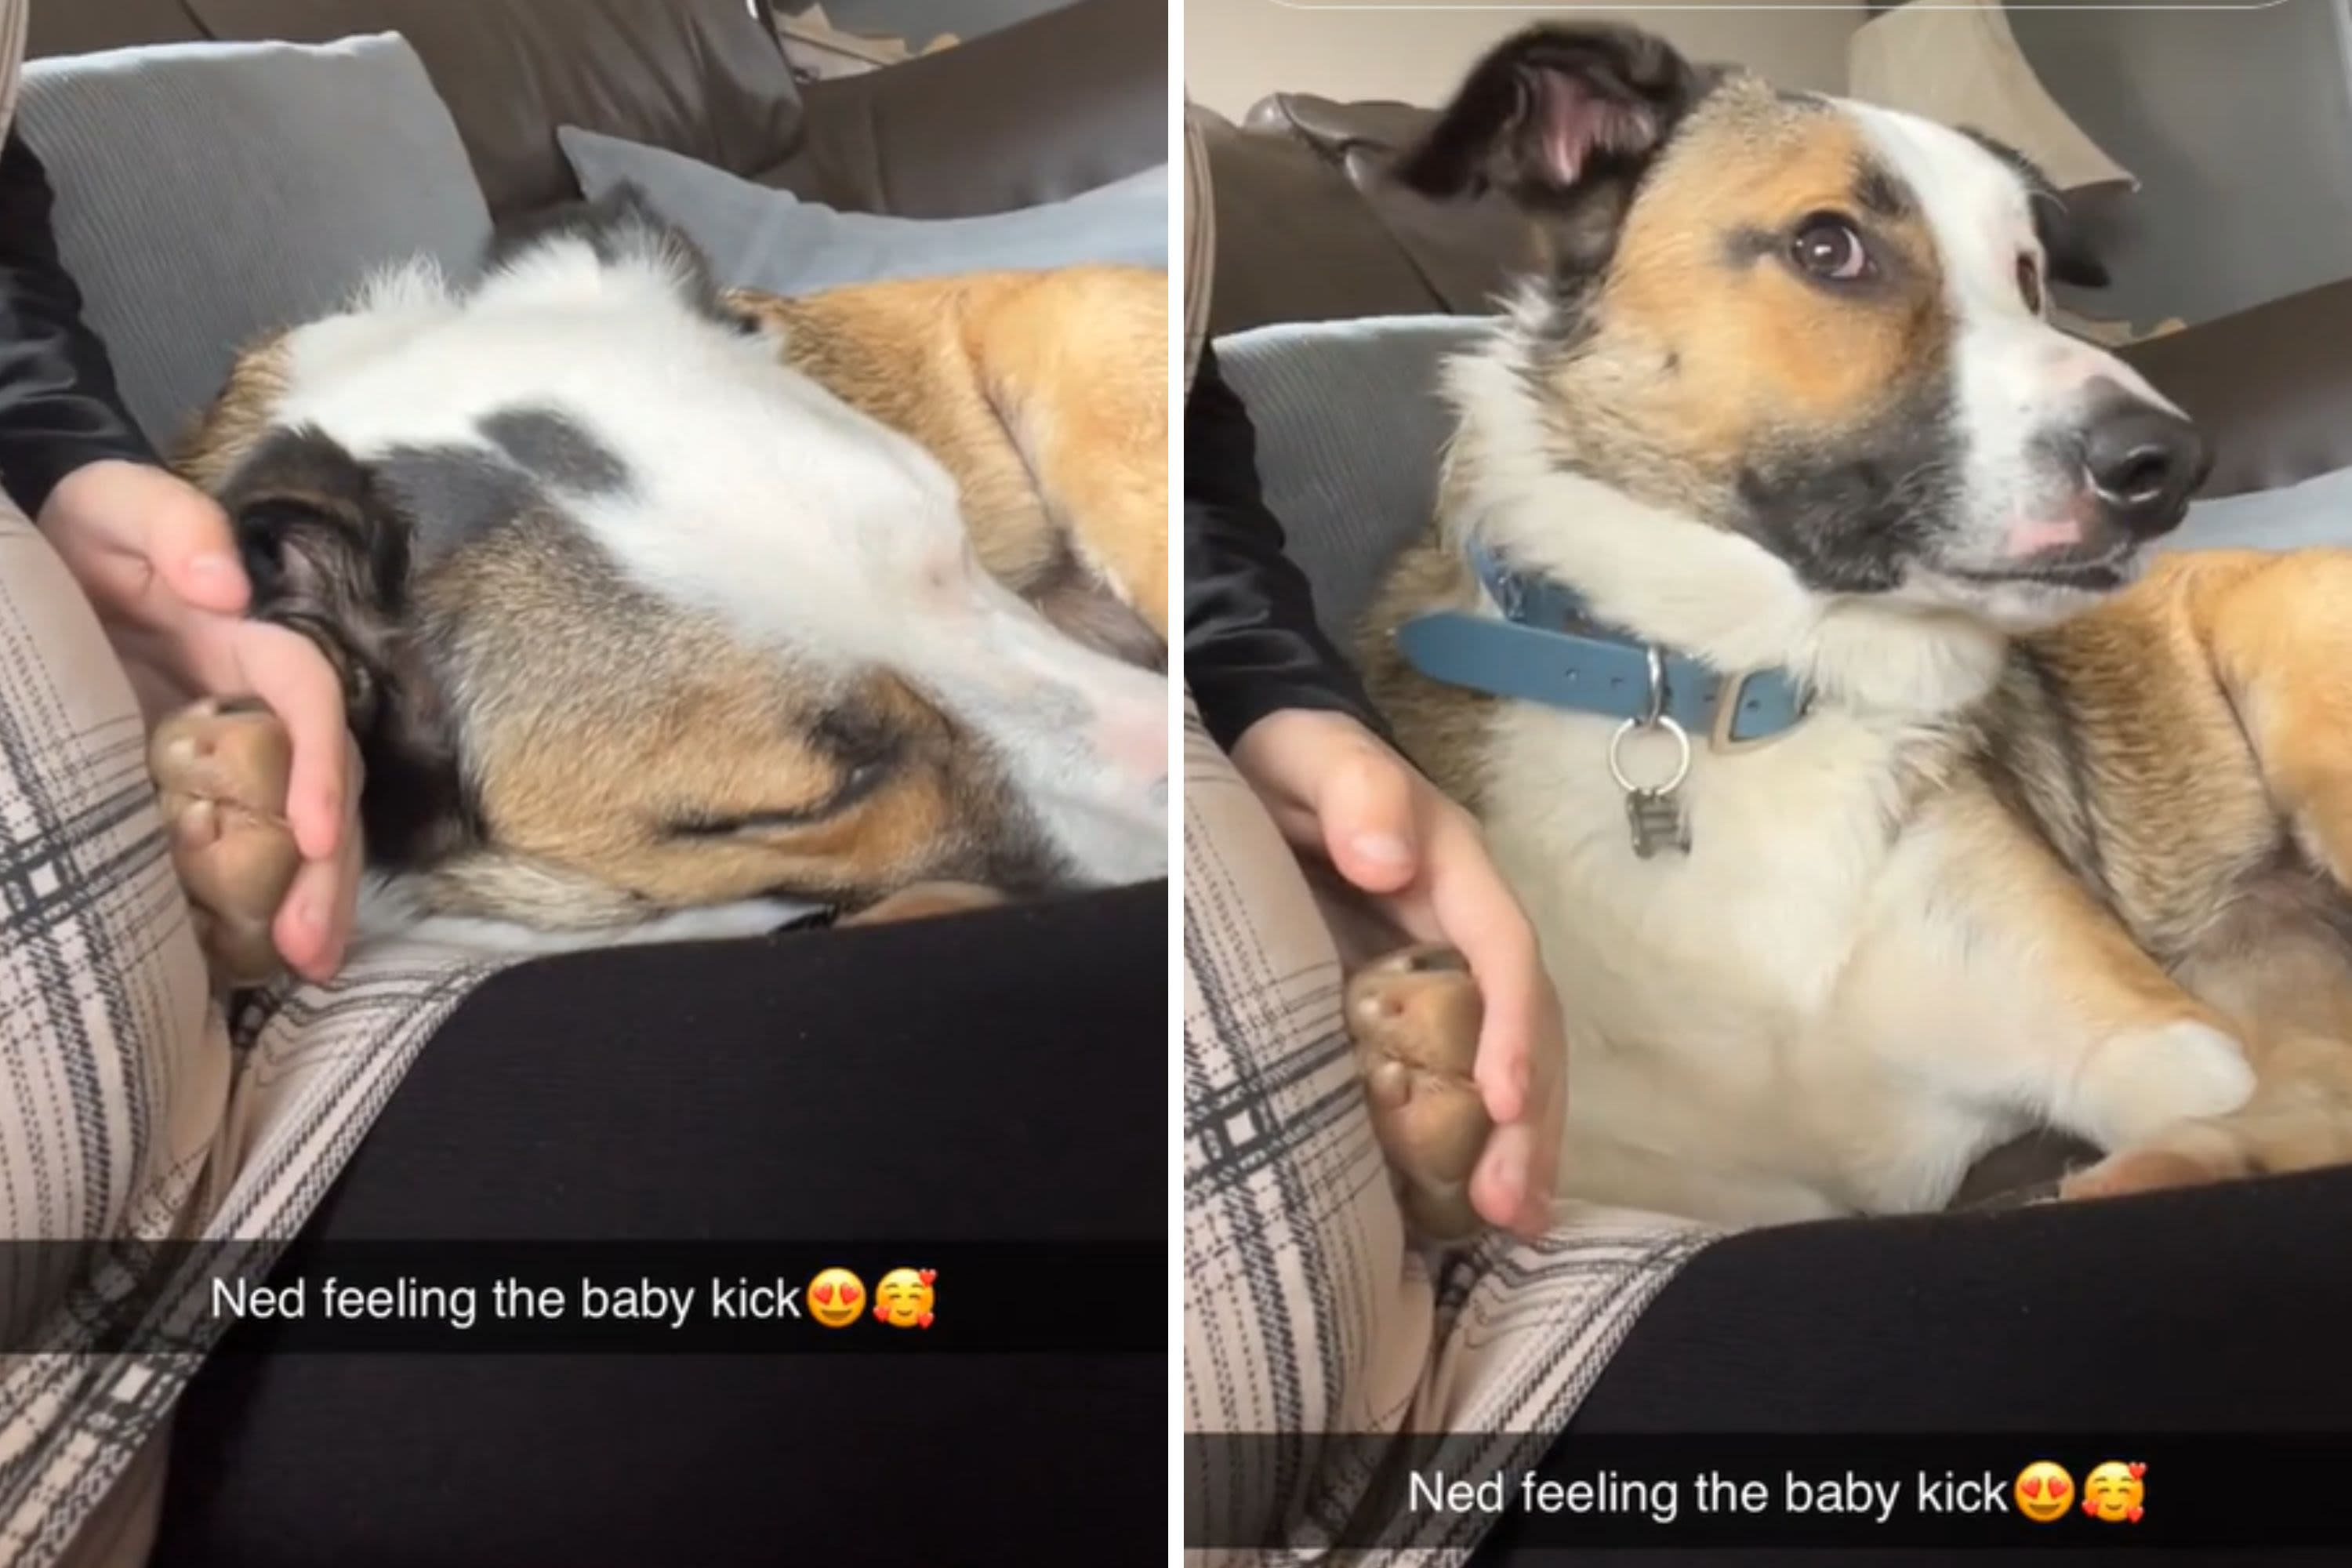 Mom-to-be captures dog's reaction the first time he feels baby kicking